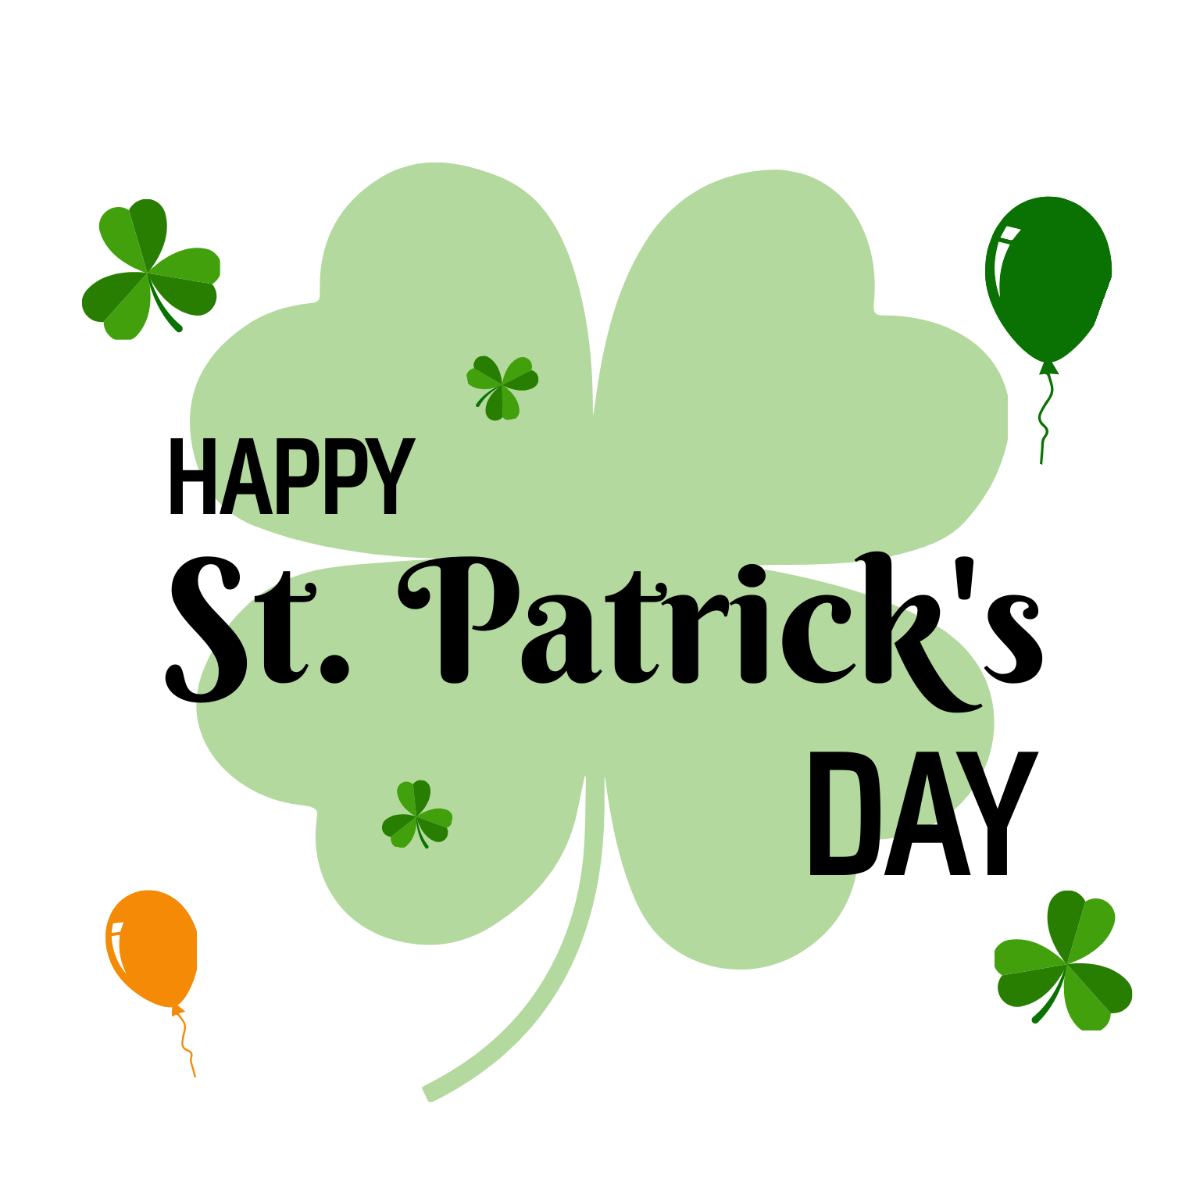 St. Patrick's Day Typography Vector Template